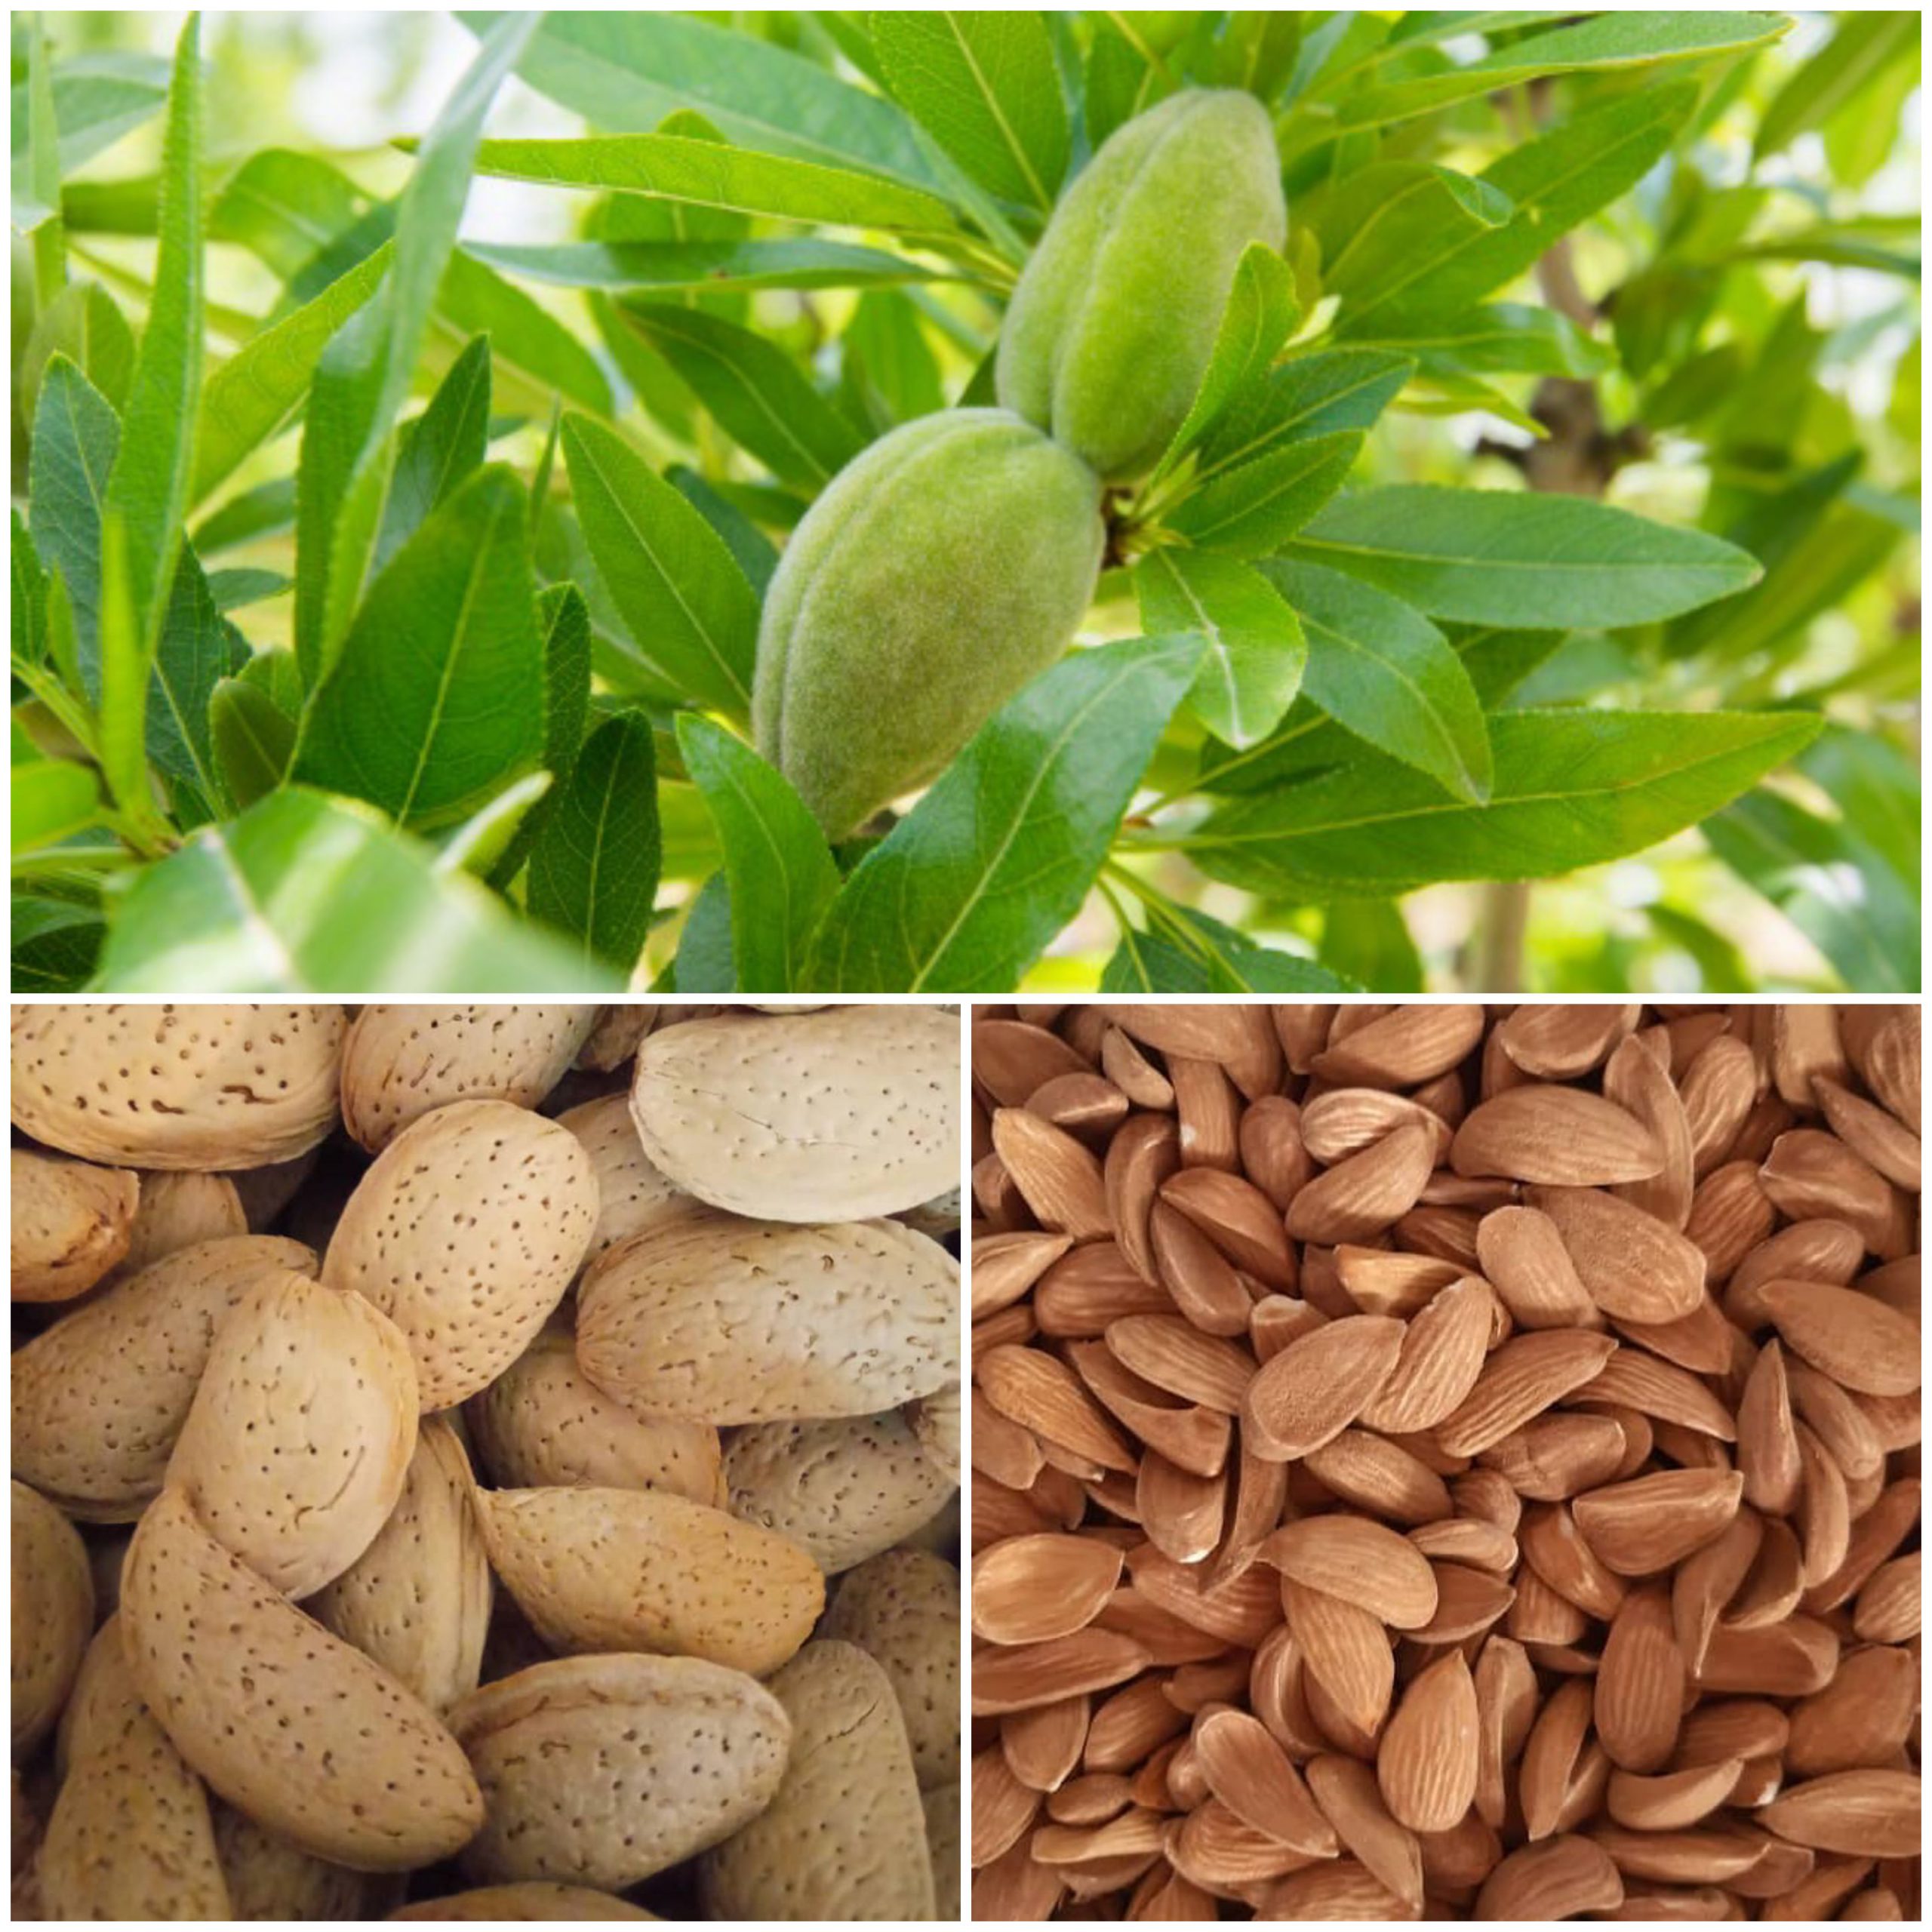  How is almond kernel produced?